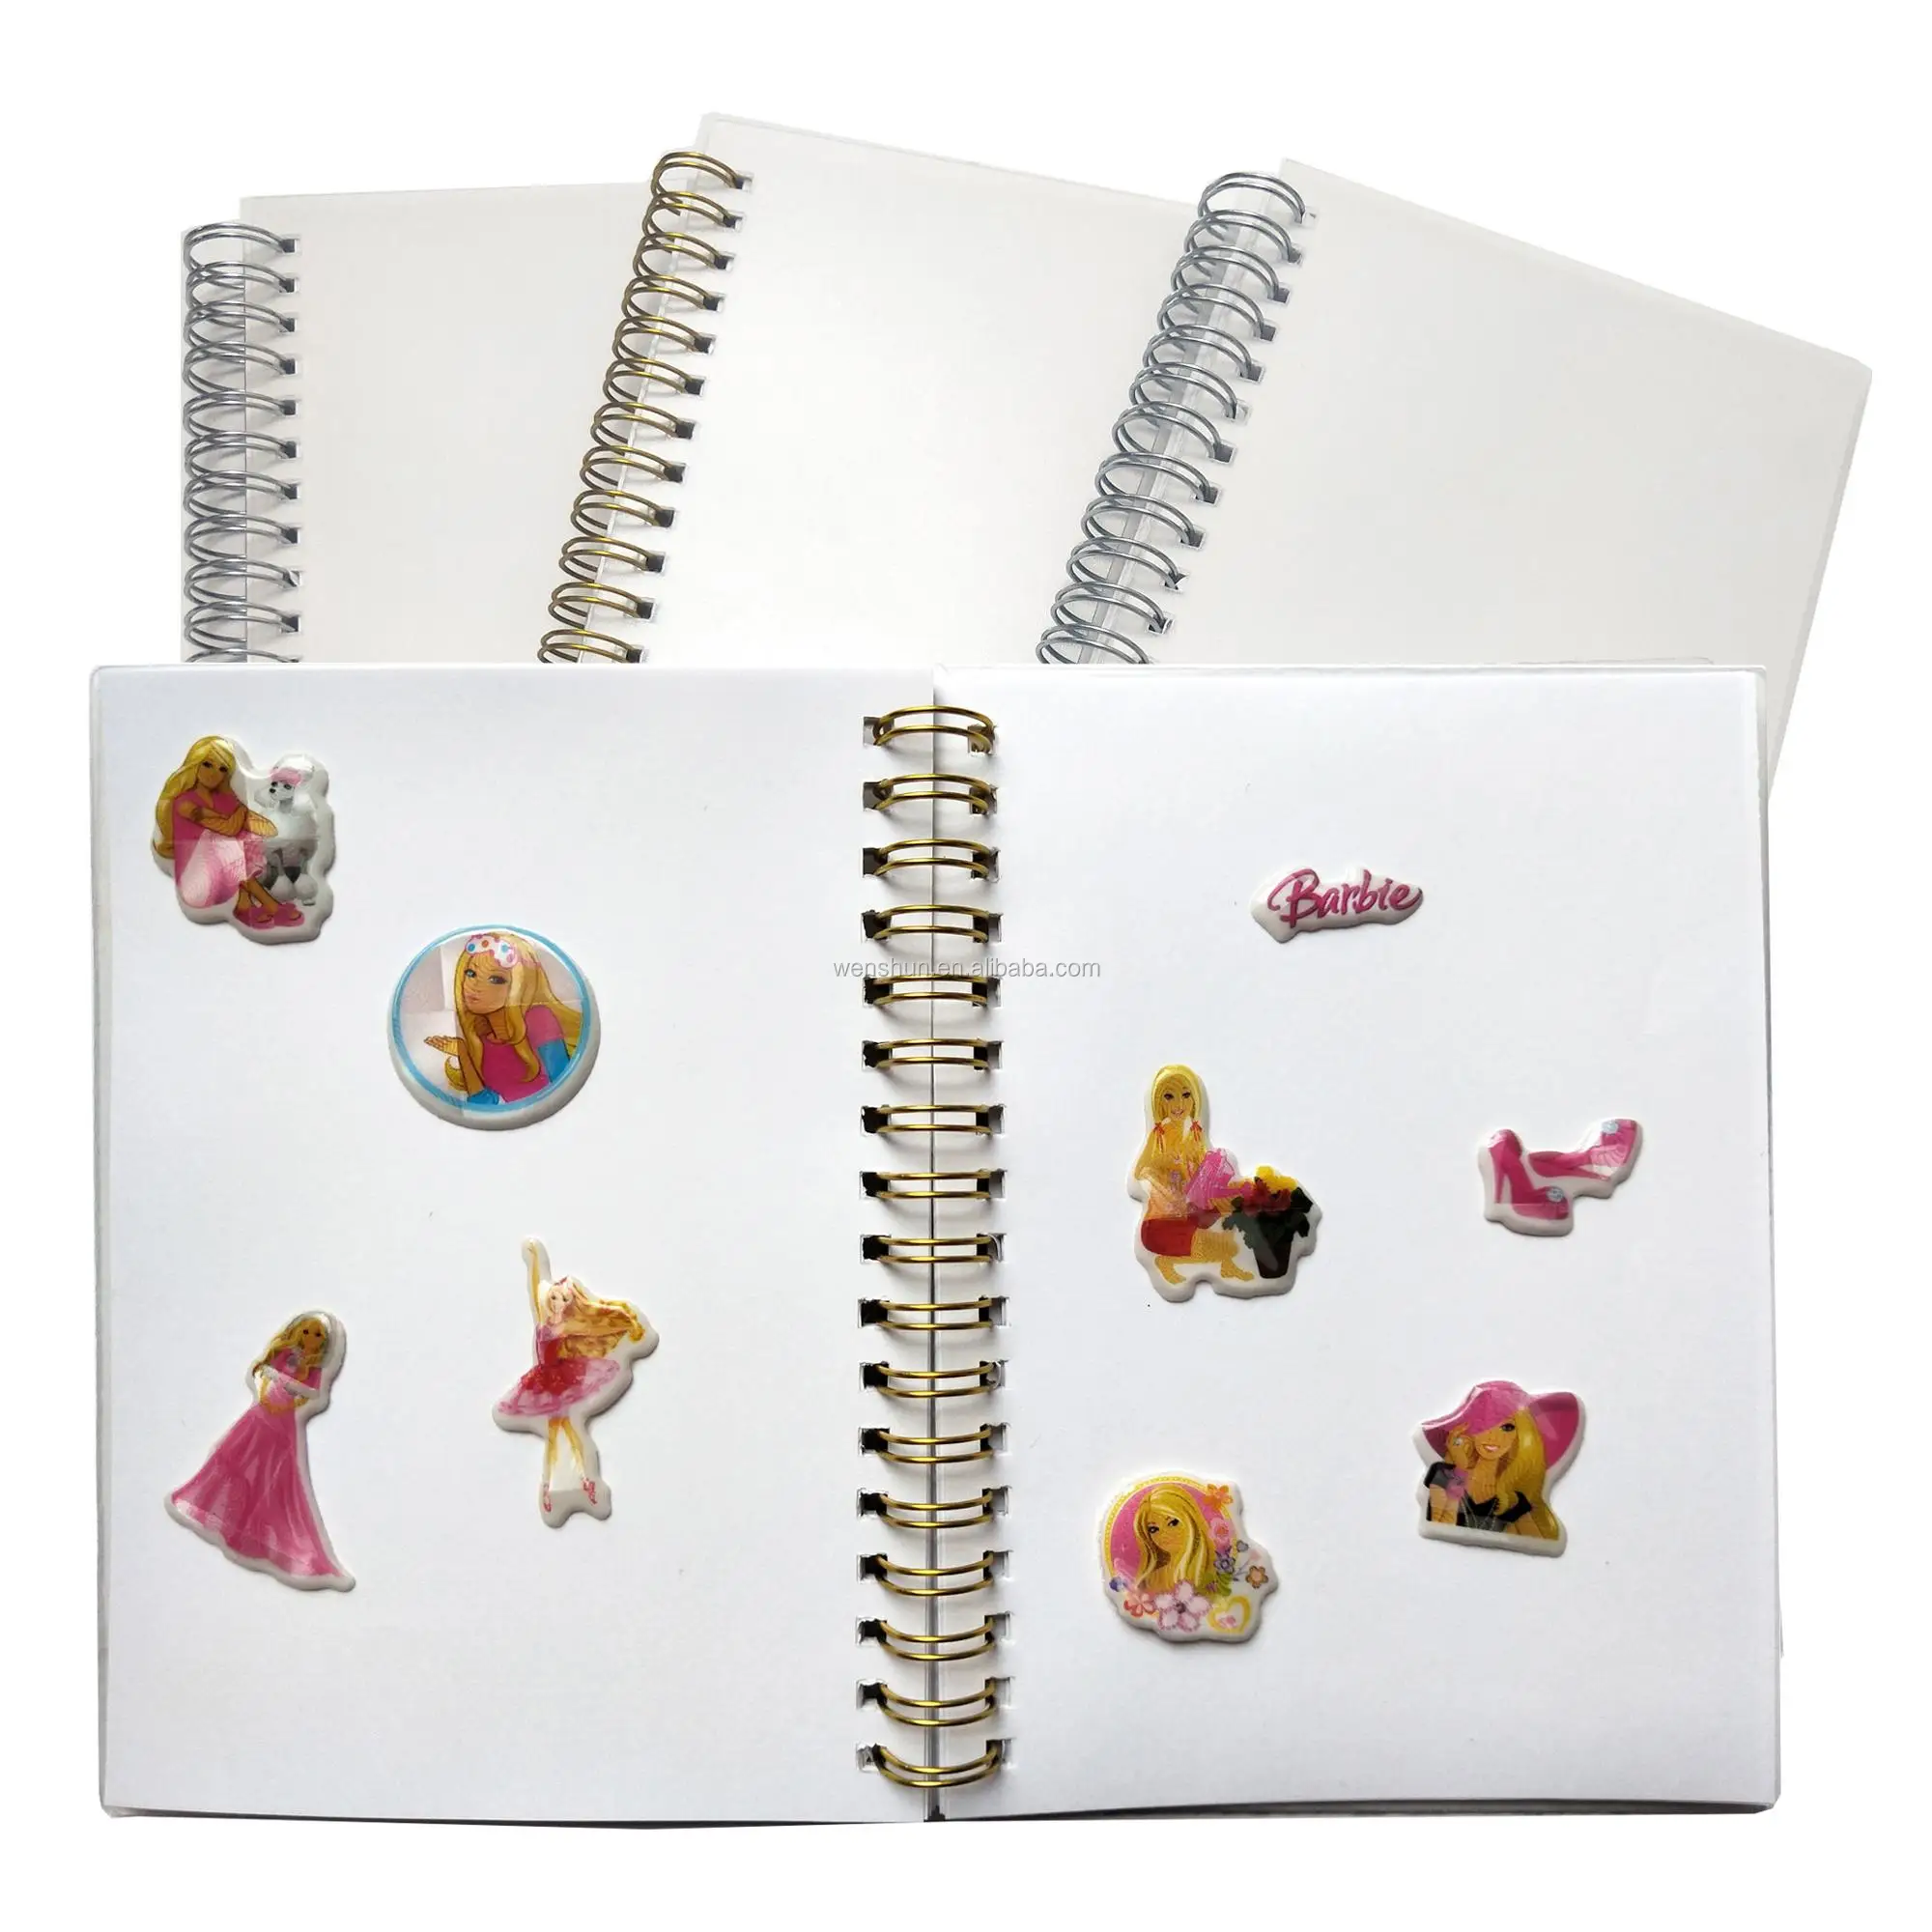 Silicone Coated Release Paper Children Sticker Album for Collecting Stickers